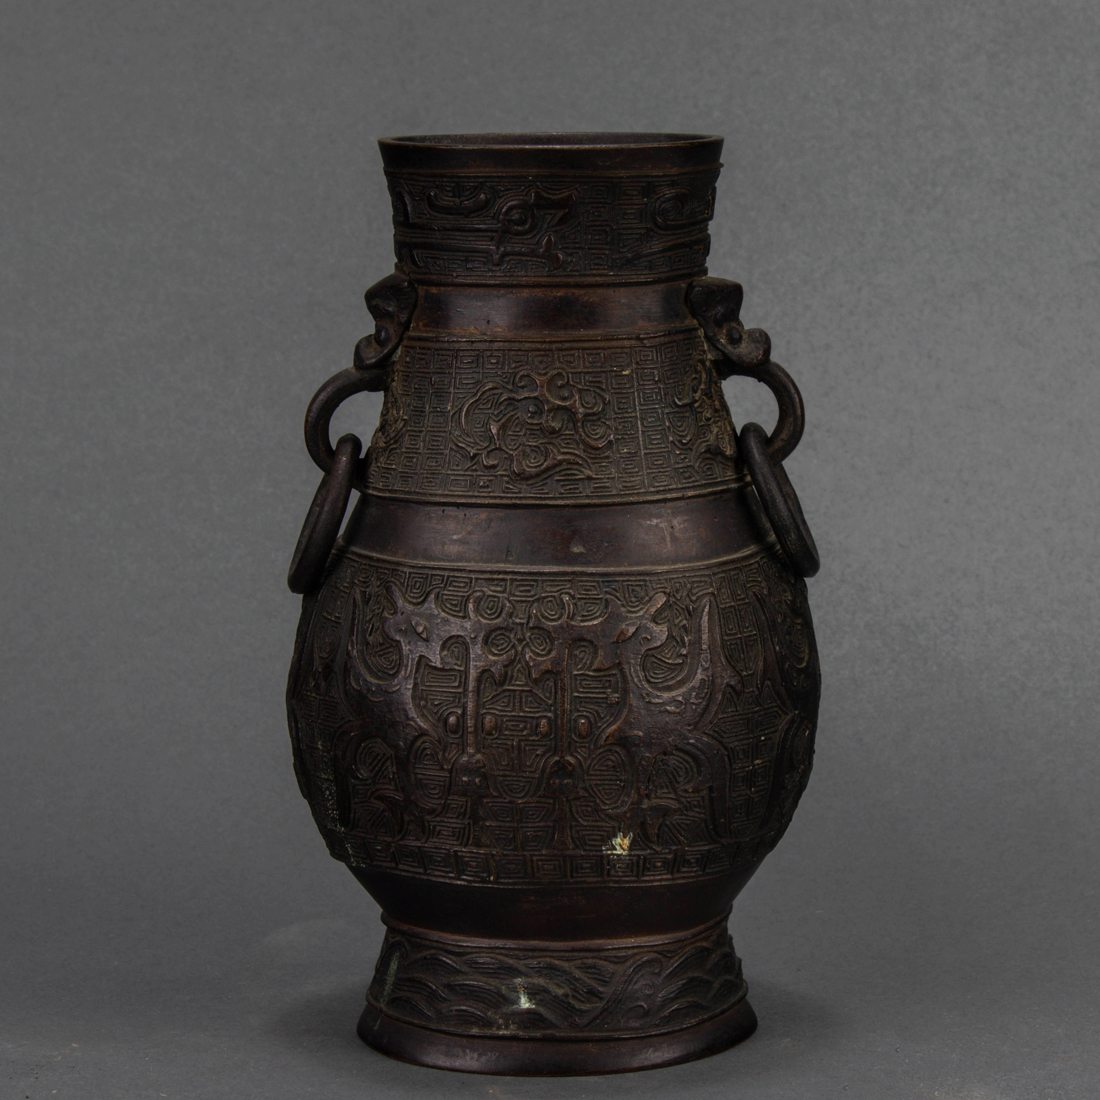 CHINESE ARCHAISTIC BRONZE HU VASE 2d13a6